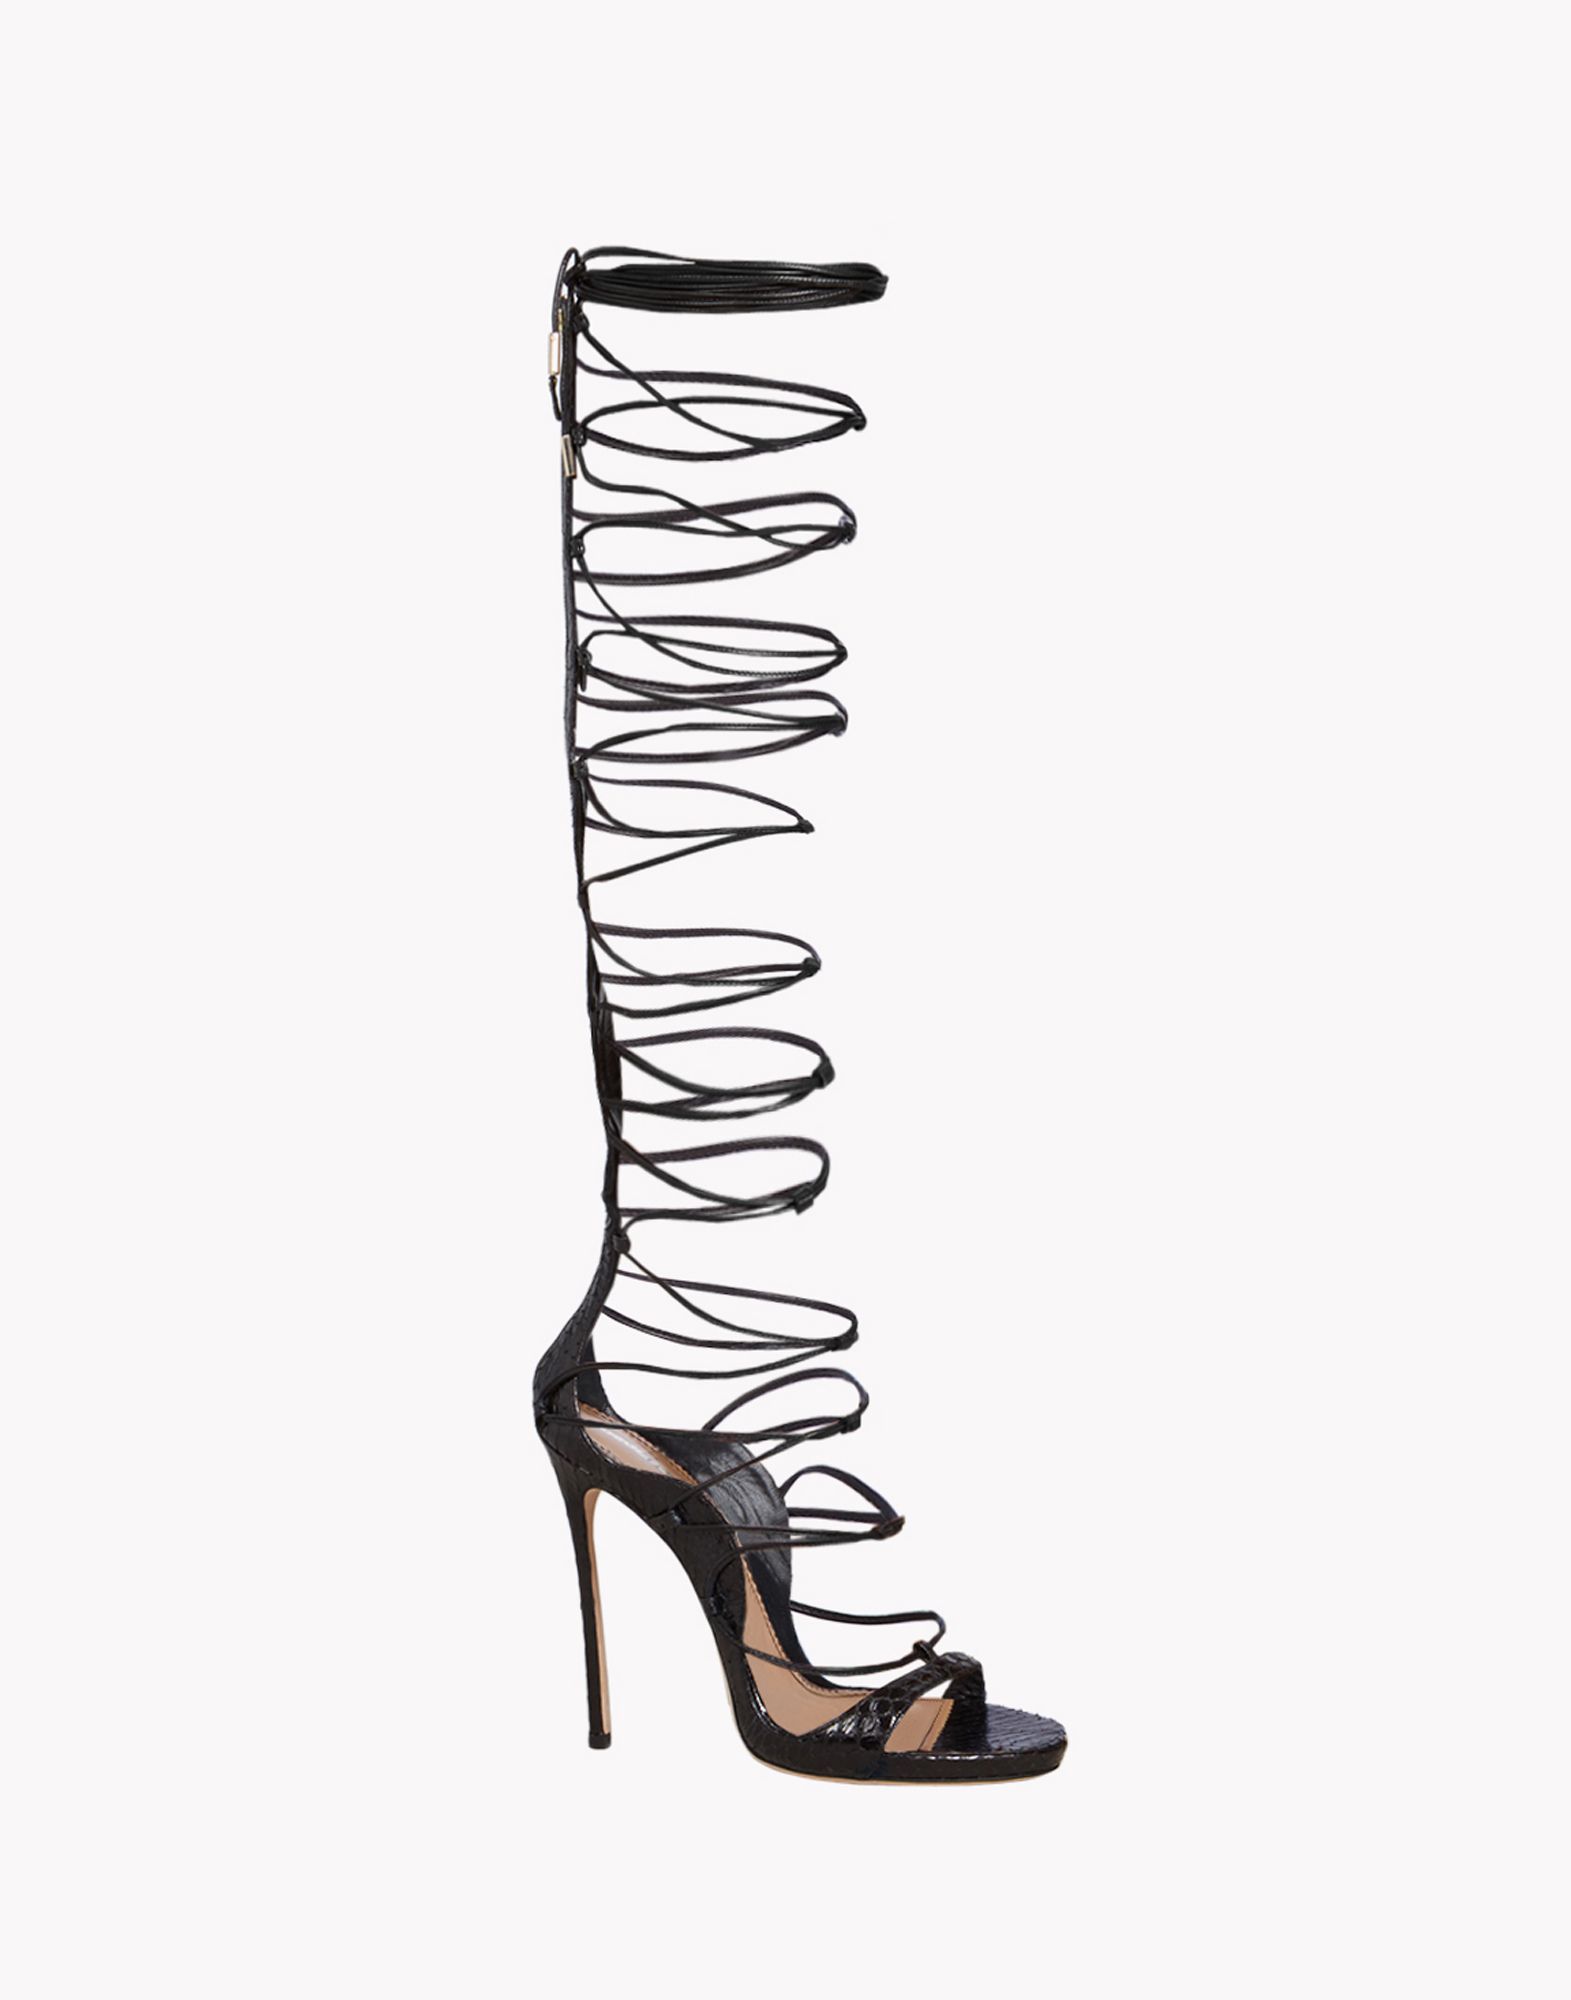 dsquared2 style heels